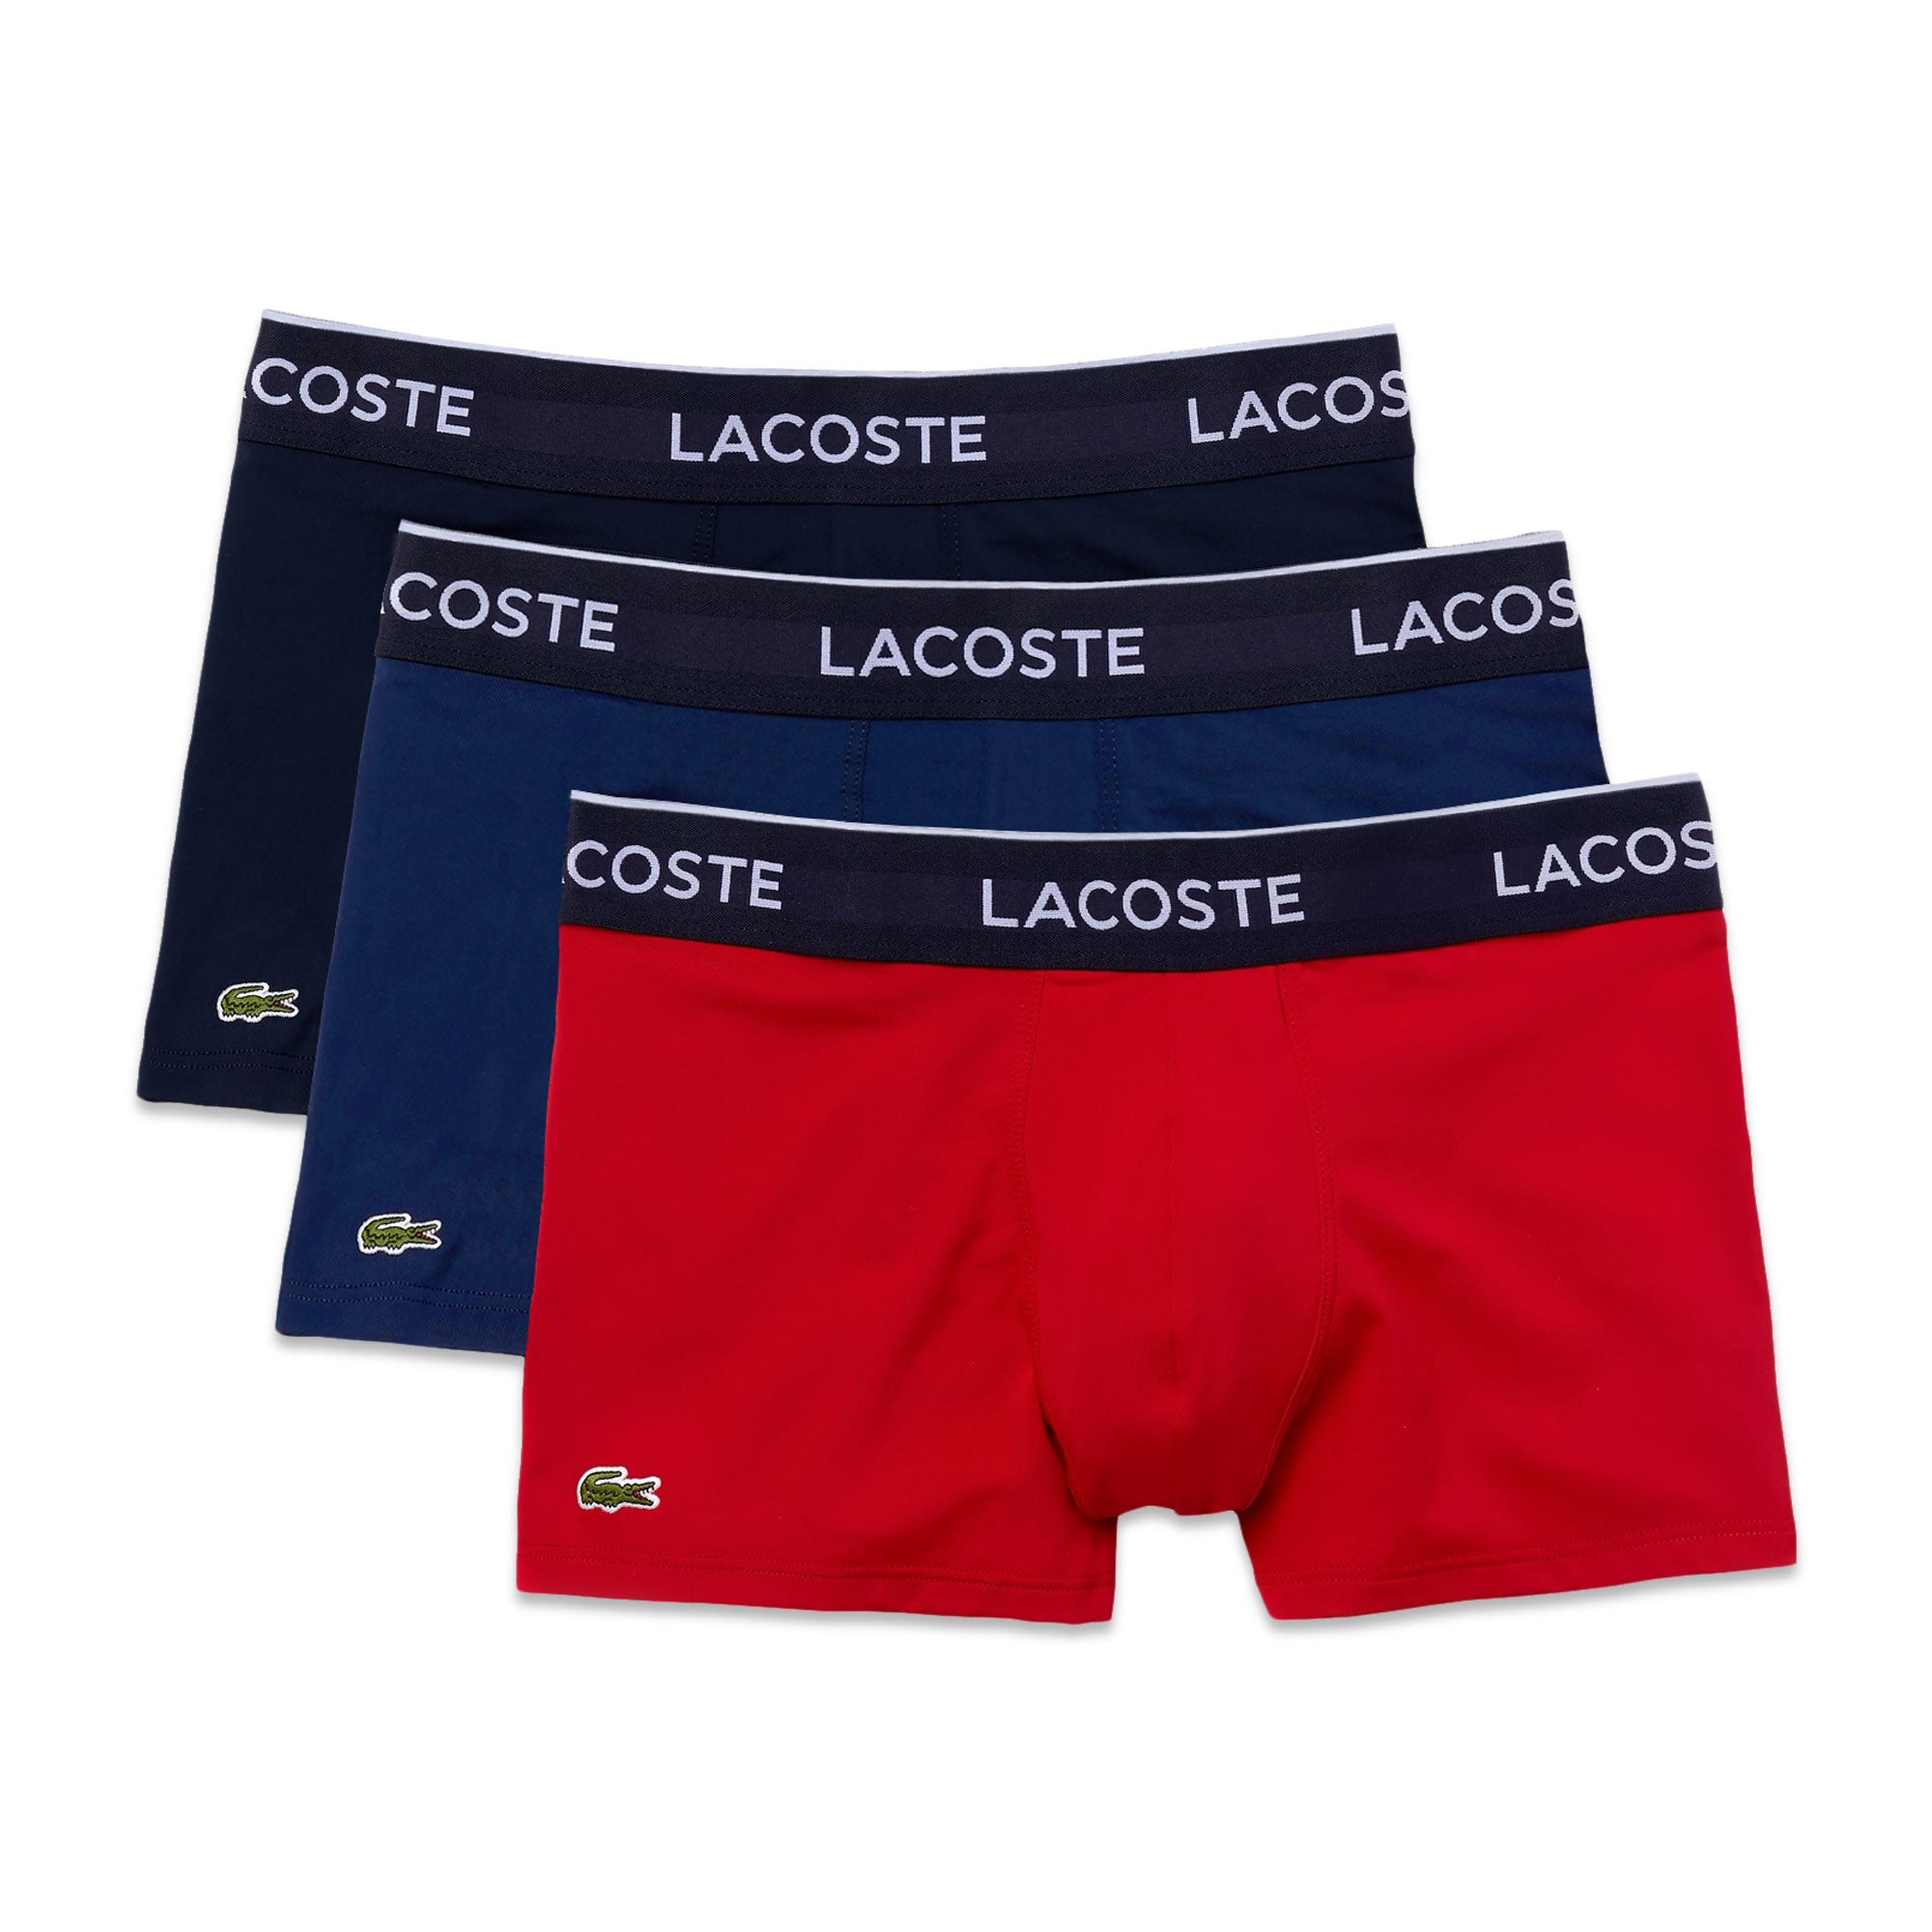 Lacoste 3 Pack Cotton Stretch Trunks - Red/Blue/Navy